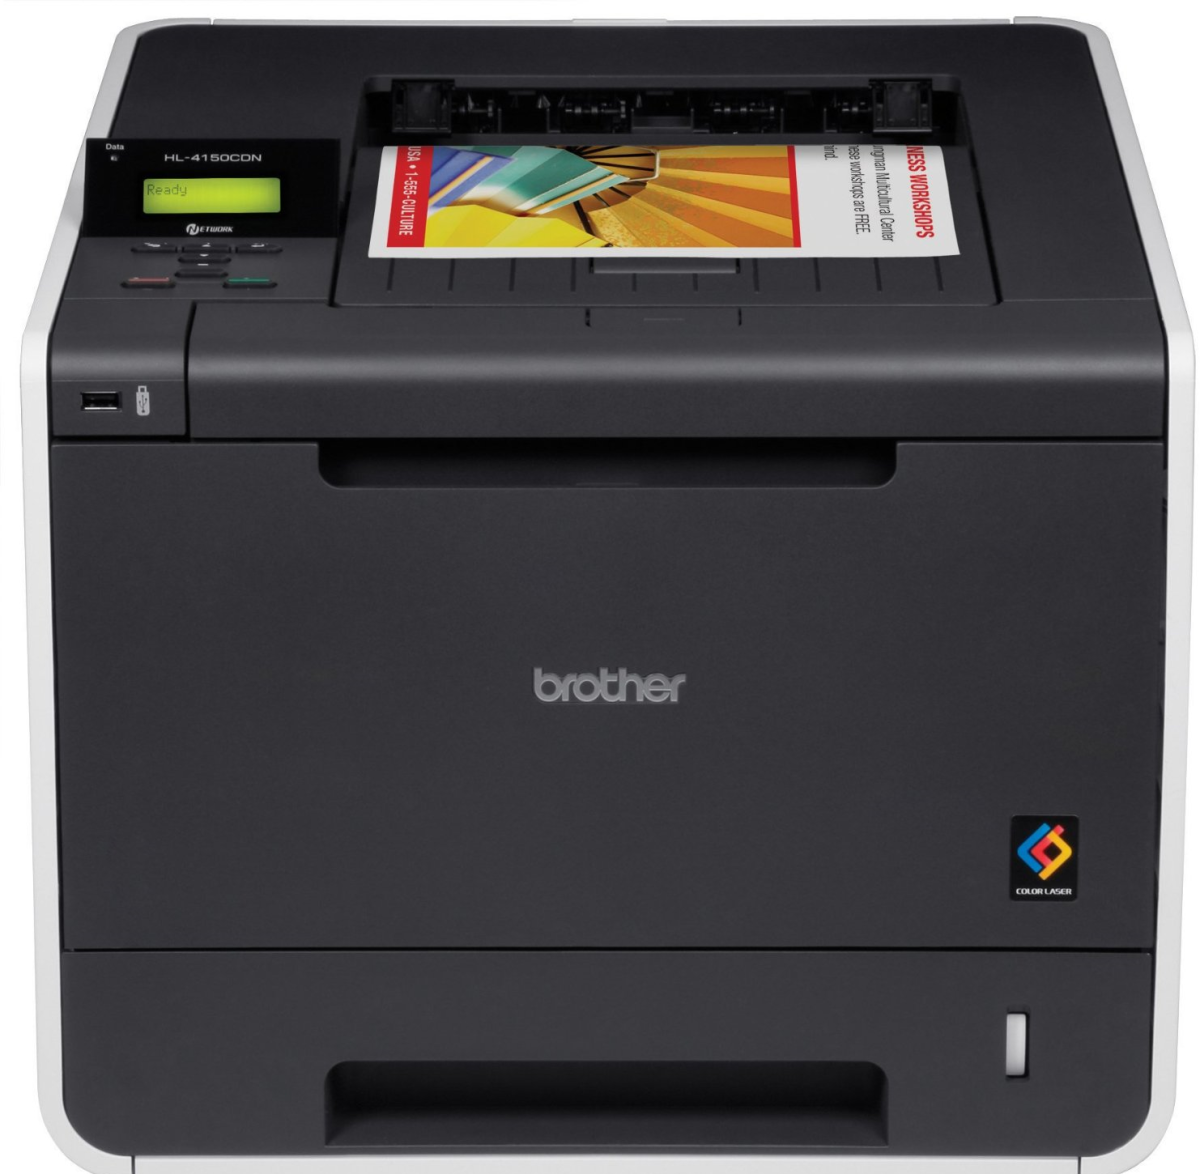 Brother laser printer HL4150CDN with Color duplex printing and networking